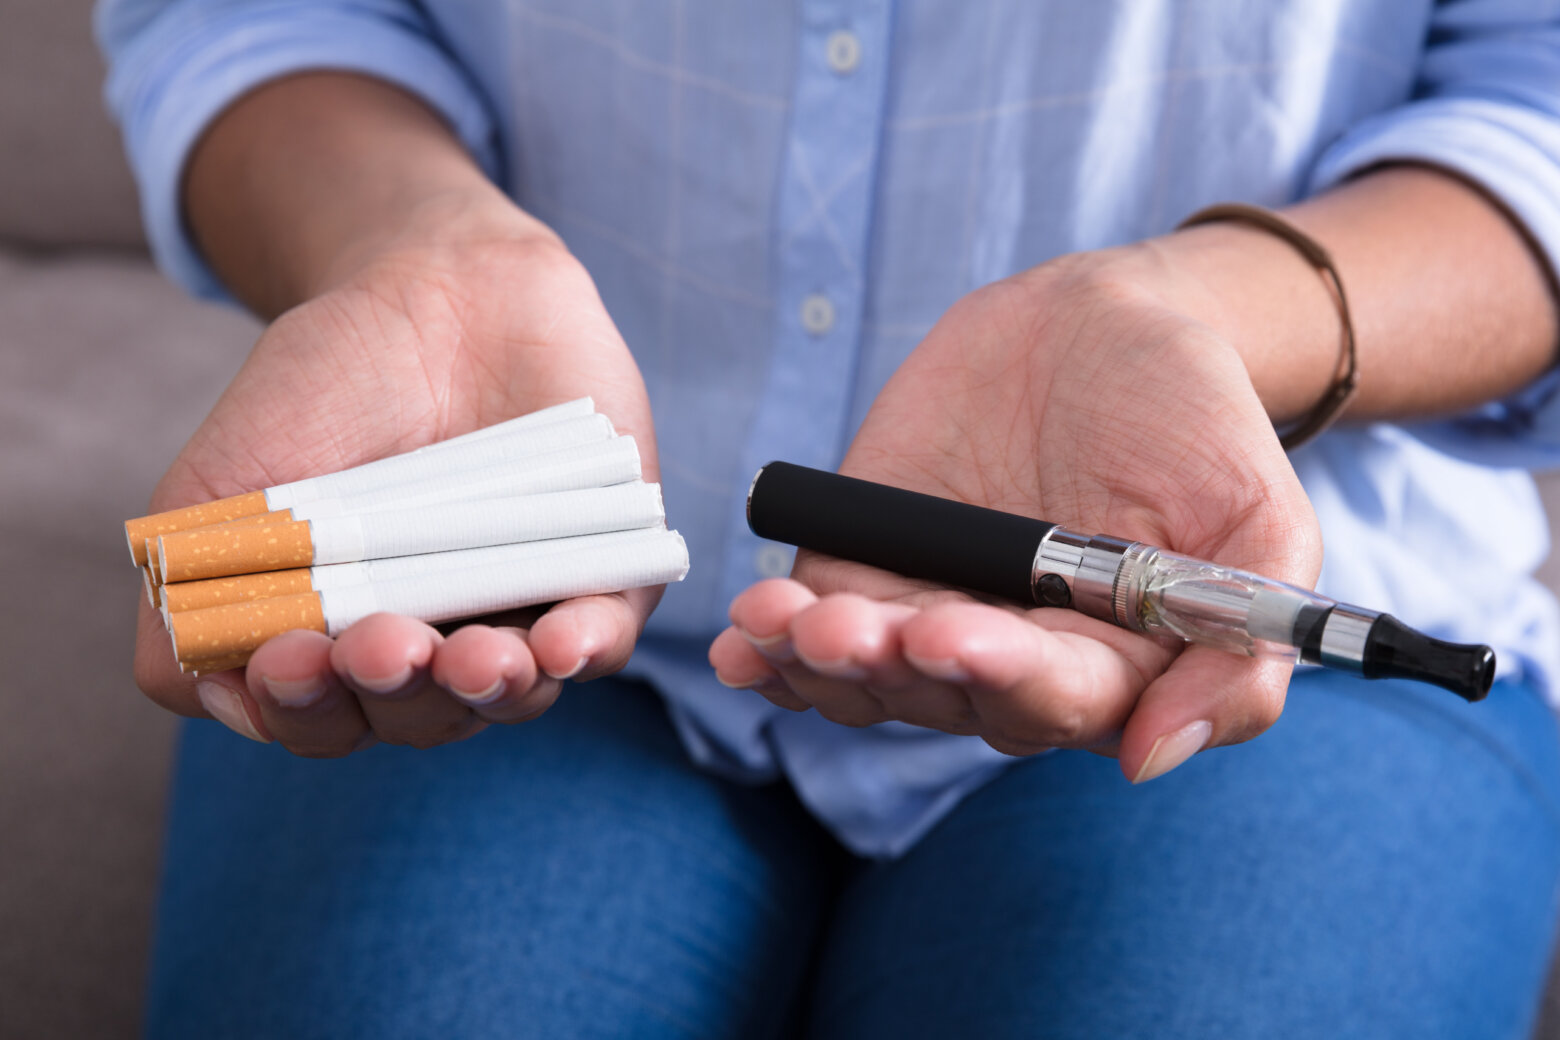 American Lung Association offers advice for freedom from smoking, vaping, tobacco use